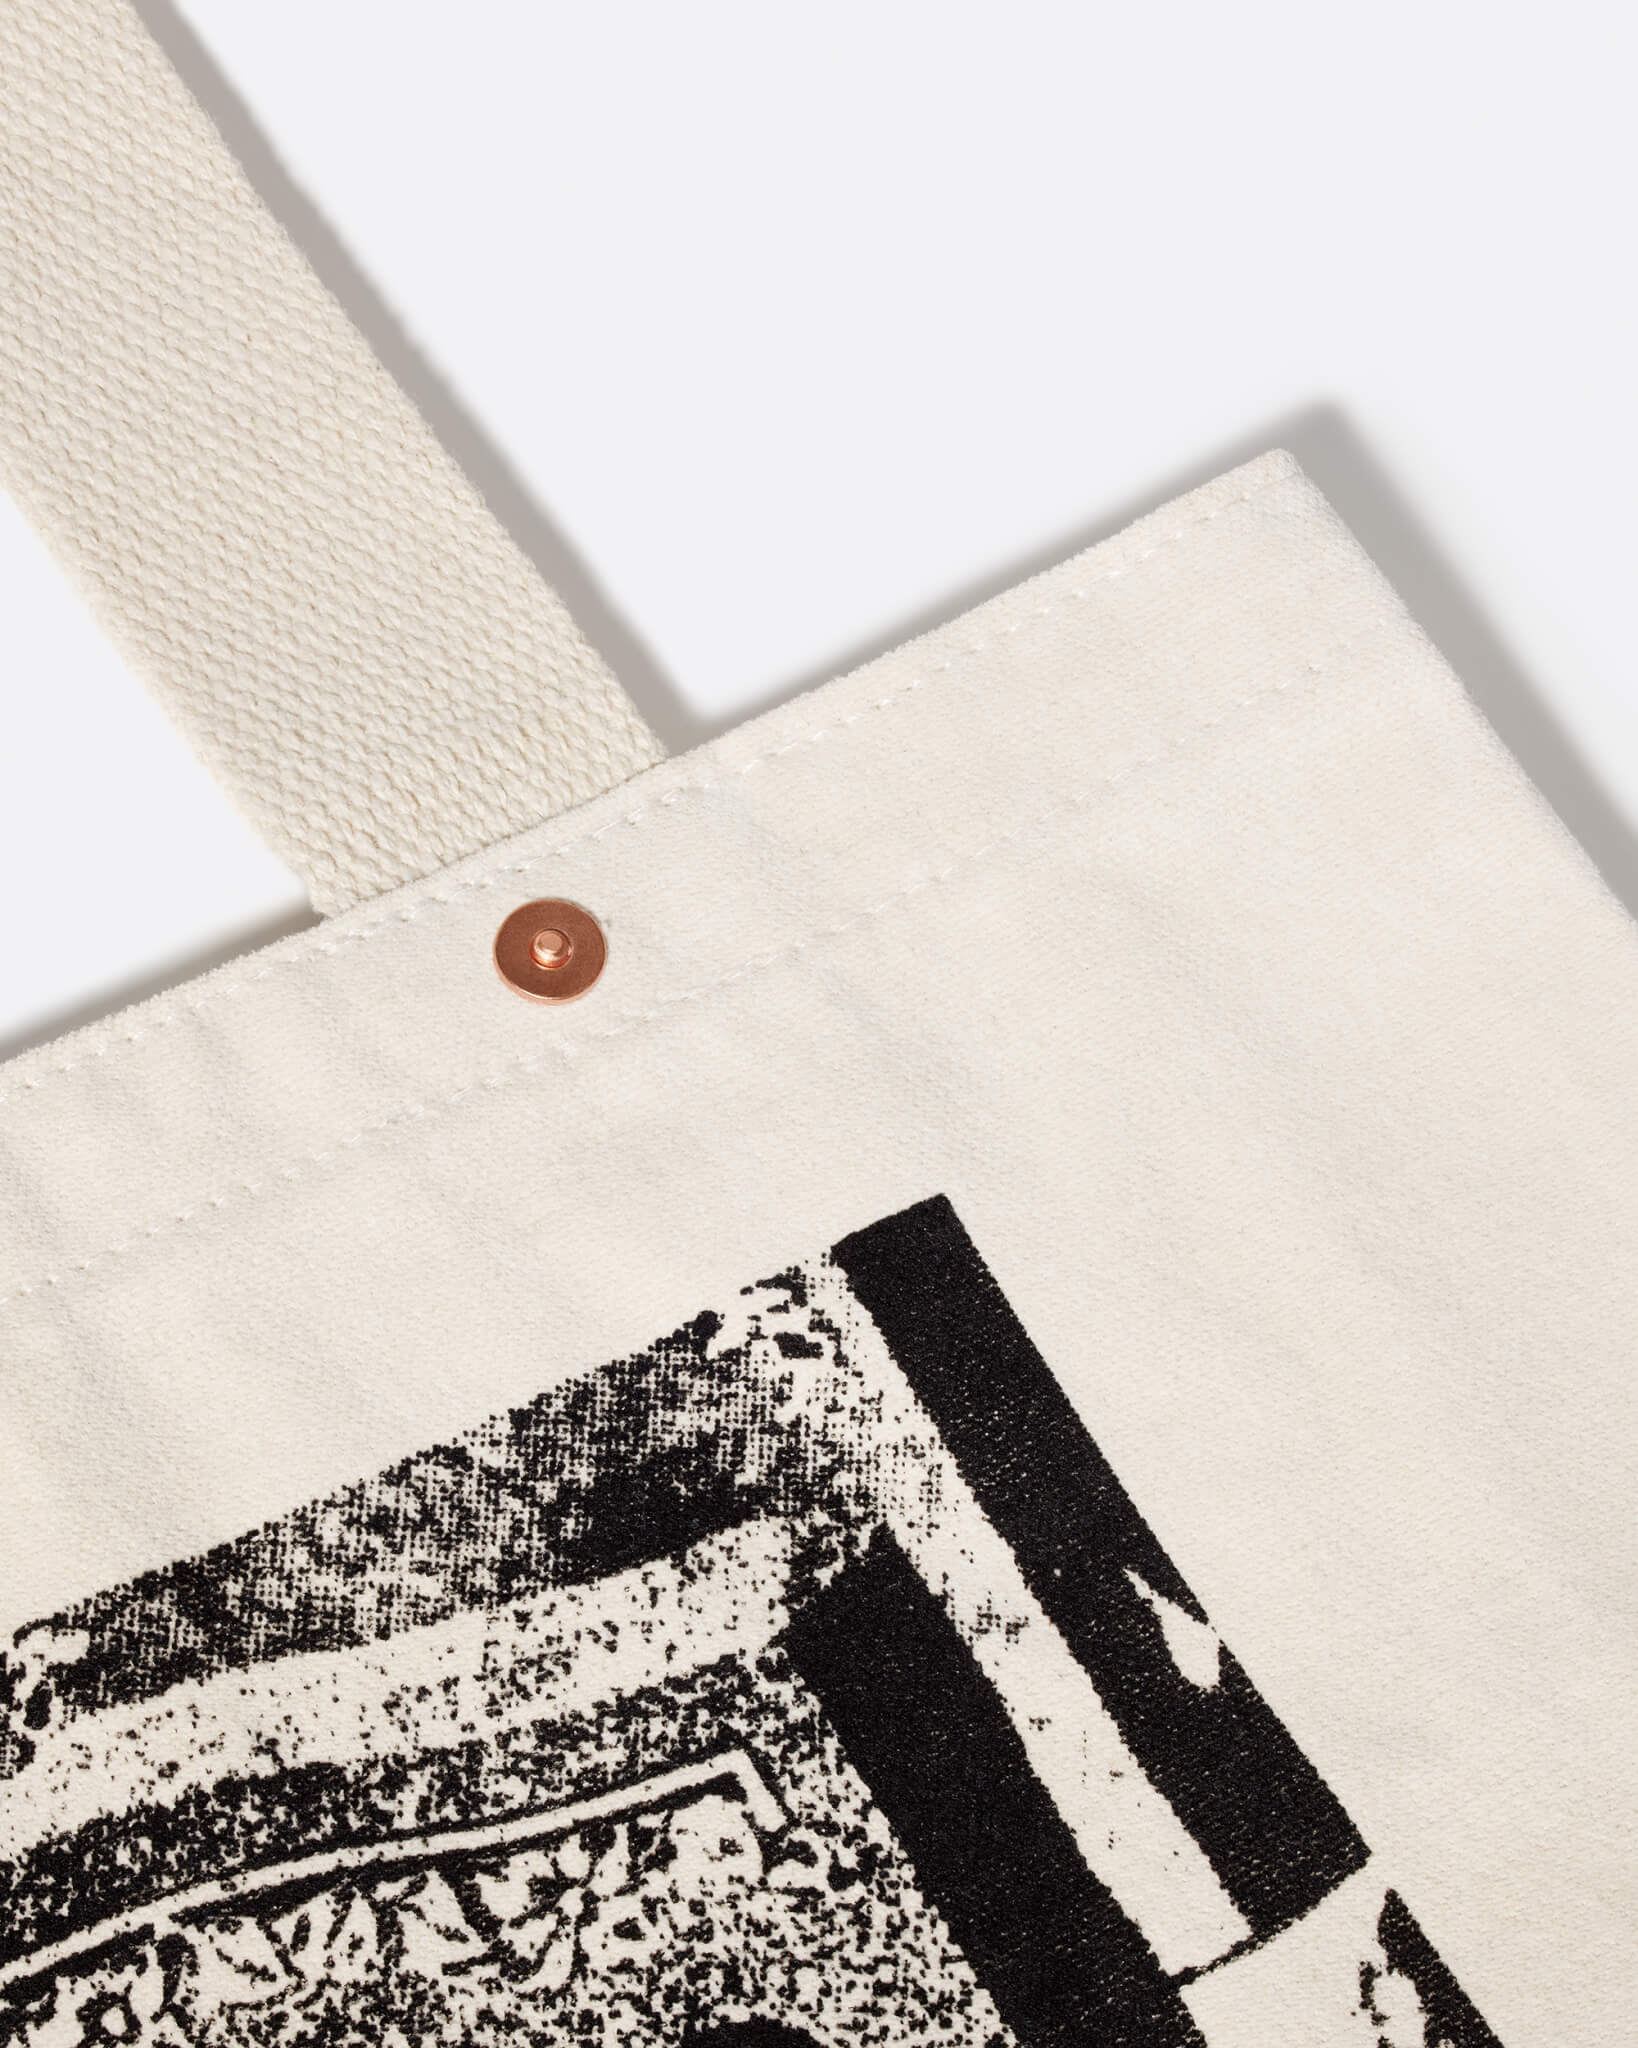 A detail shot of the top right corner of a brushed canvas tote bag made with 100% post-consumer recycled cotton, angled to the viewer’s left, showing the corner of a large greyscale graphic, and a coppertone metal rivet at the base of the handle.